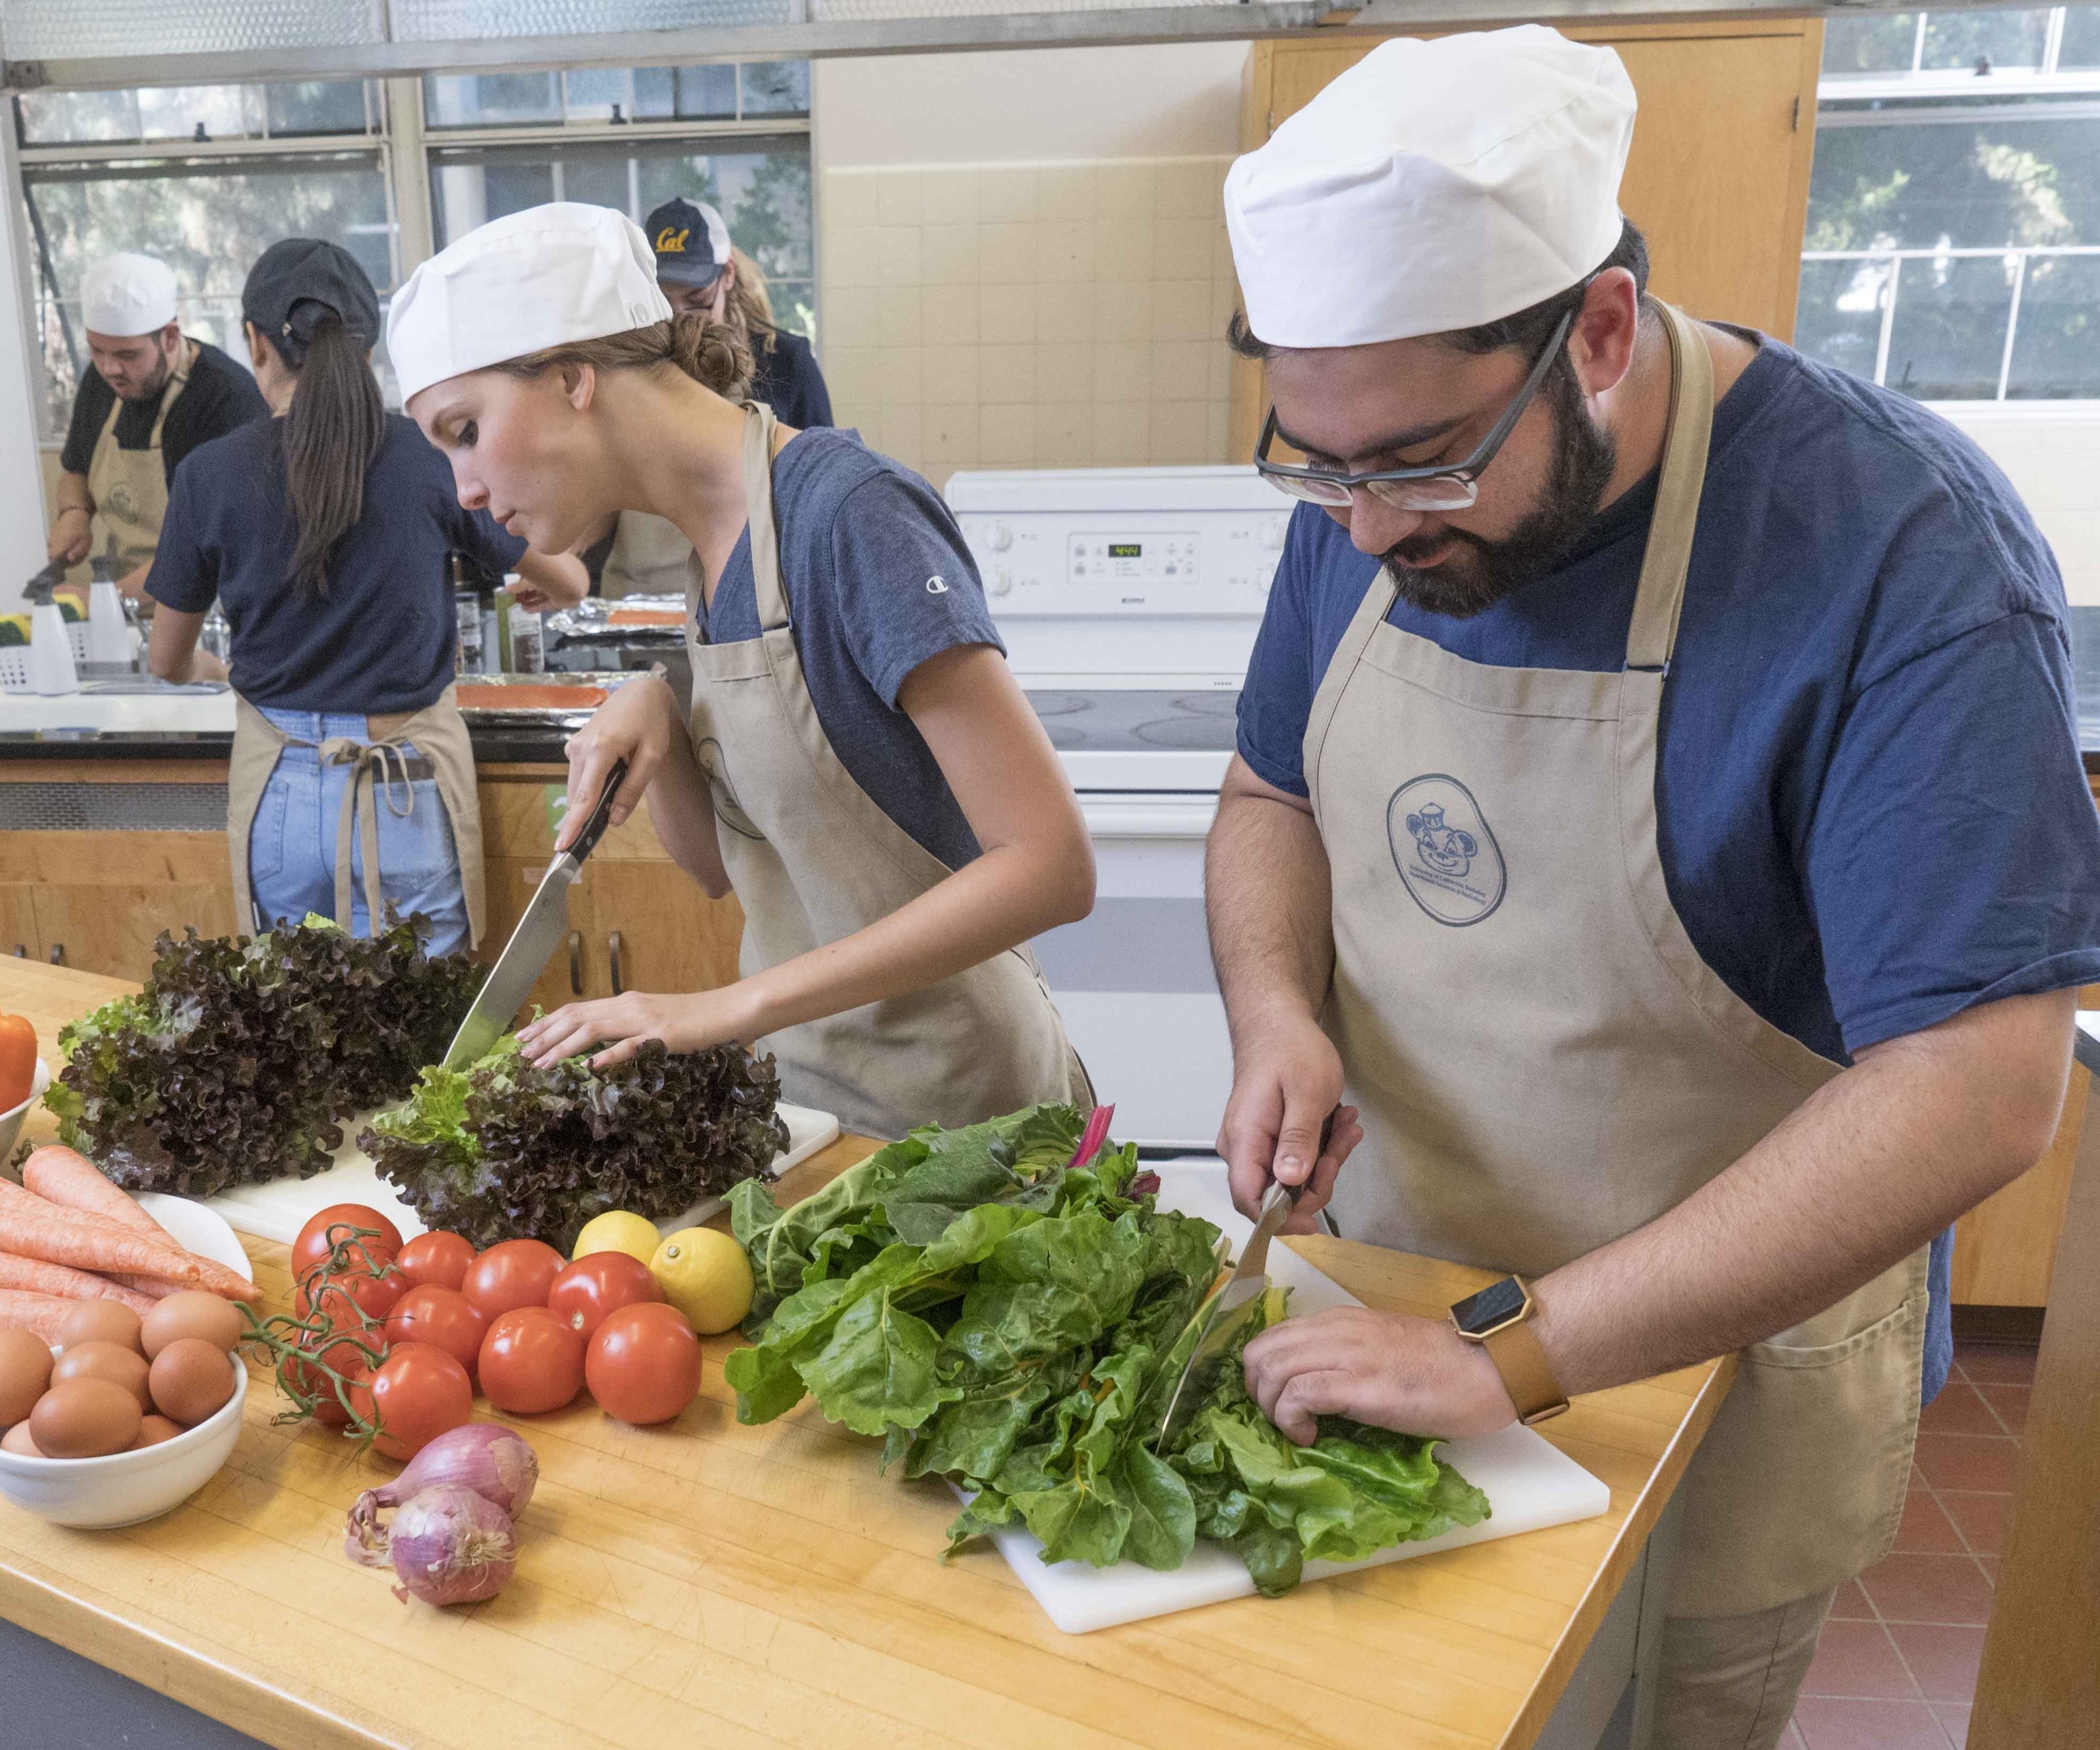 Teaching Kitchen course helps improve student food safety